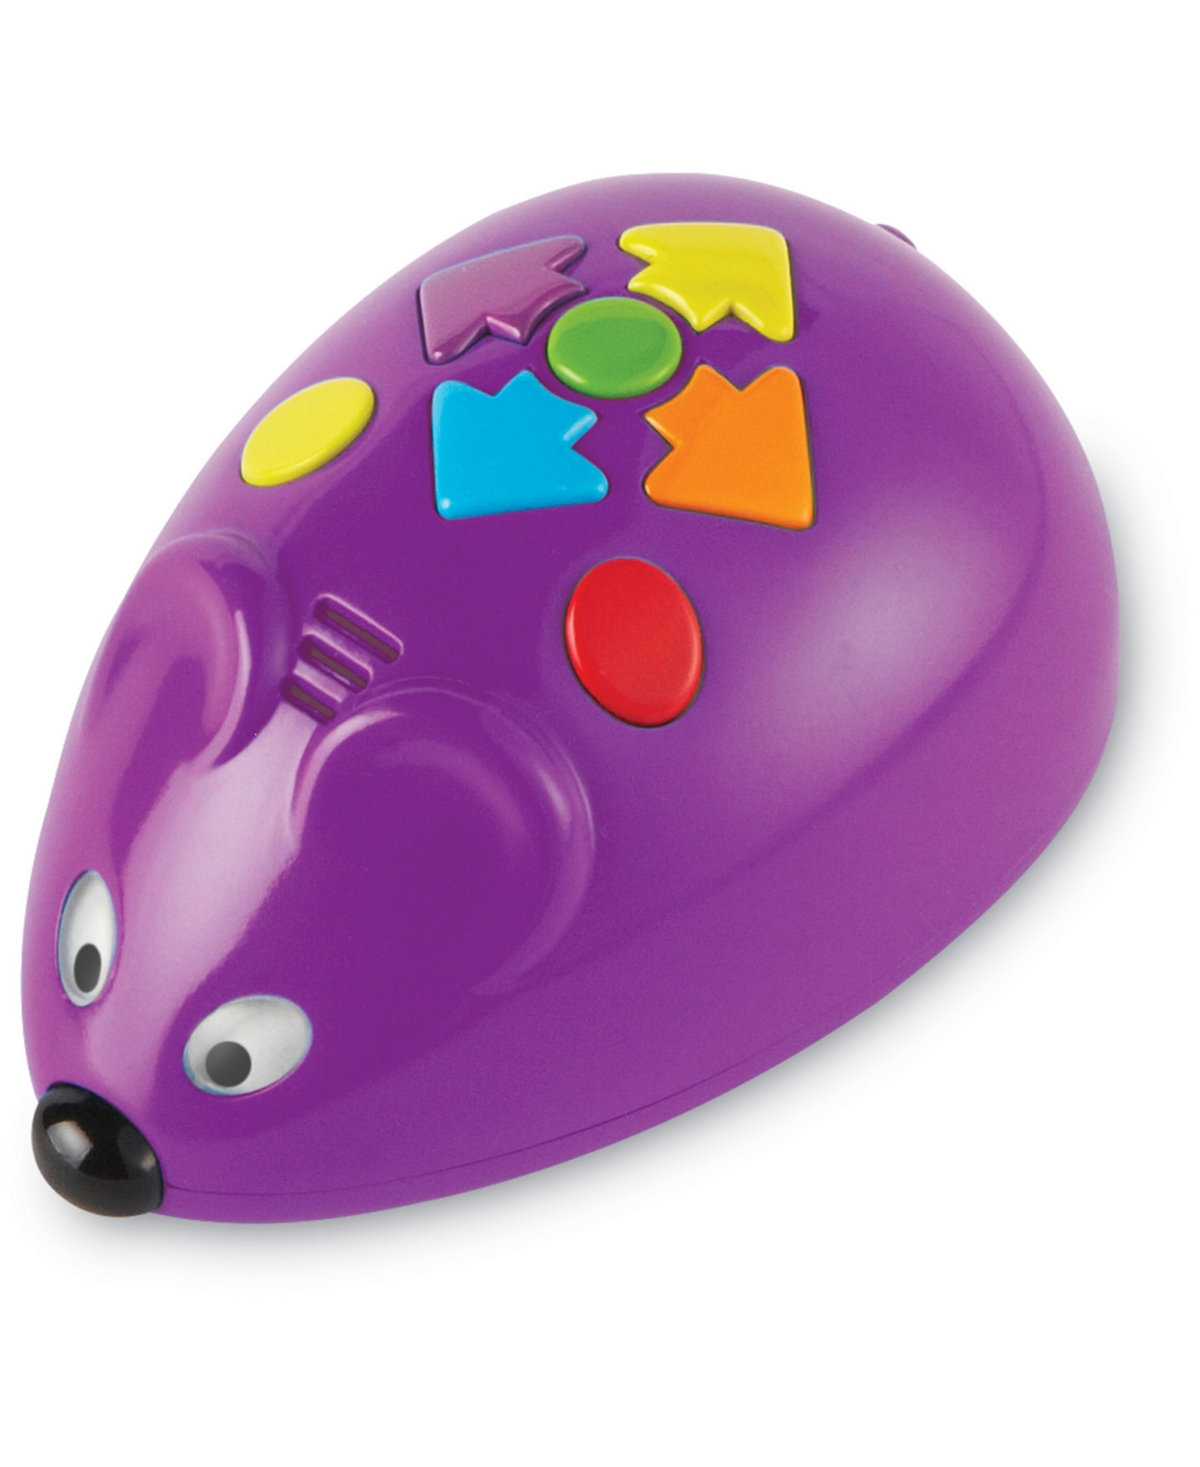 Shop Areyougame Learning Resources Code Go Robot Mouse In Multi